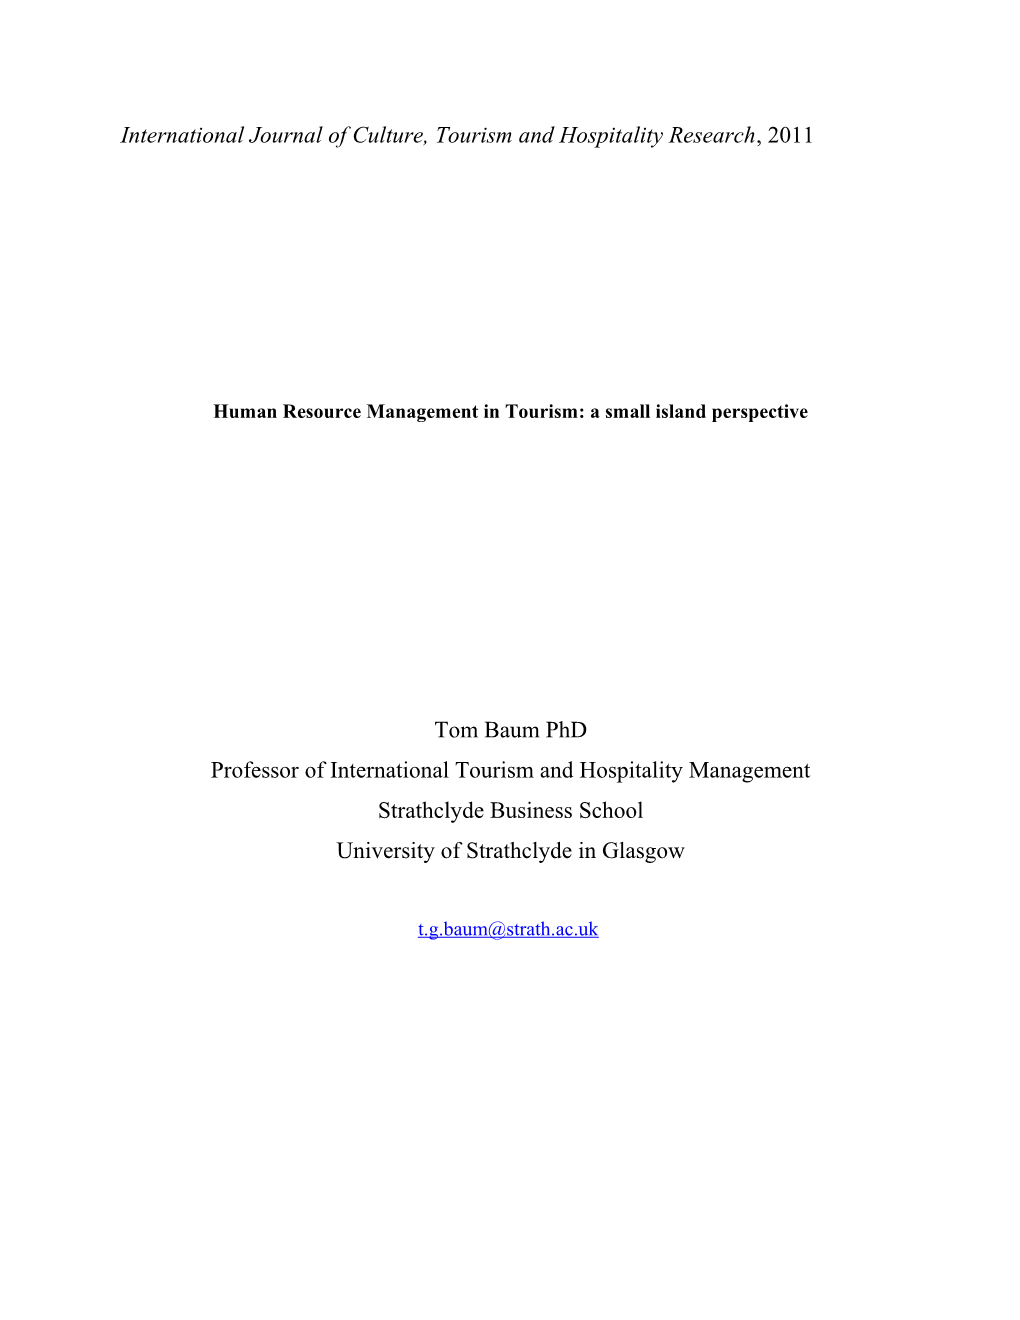 Human Resource Management in Tourism: a Small Island Perspective